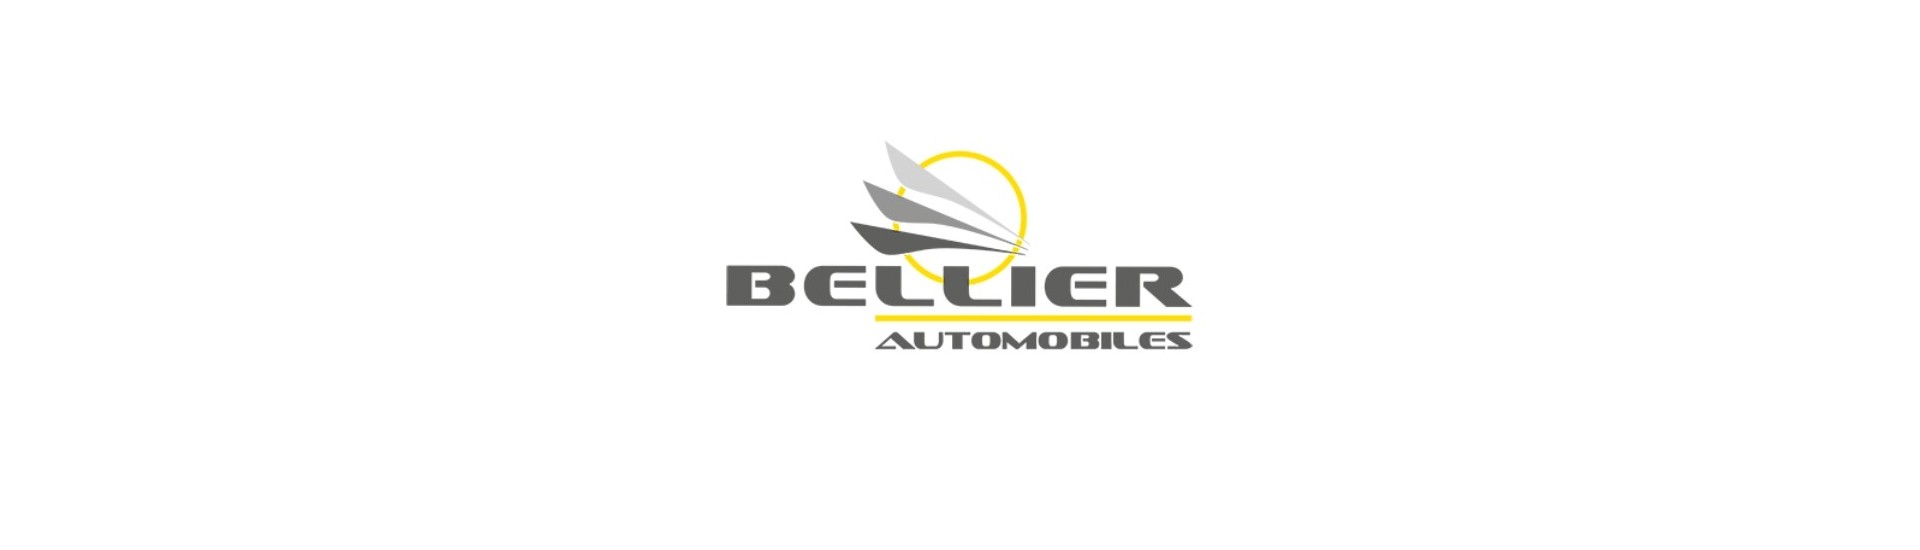 Door stop at the best price for car without a permit Bellier